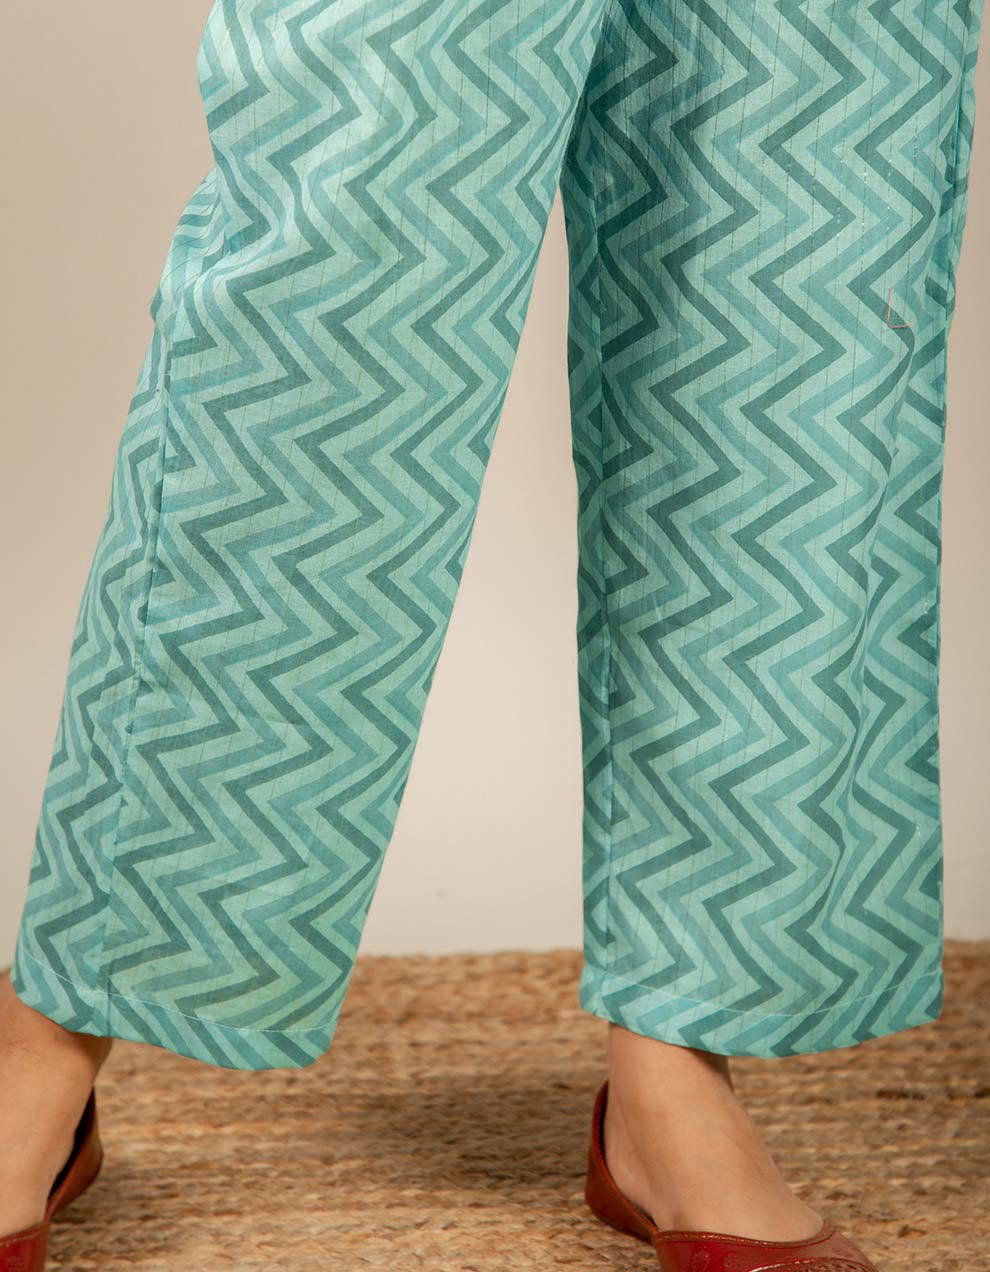 Premier-green-printed-cotton-pants-designs-at-the-best-prices-1